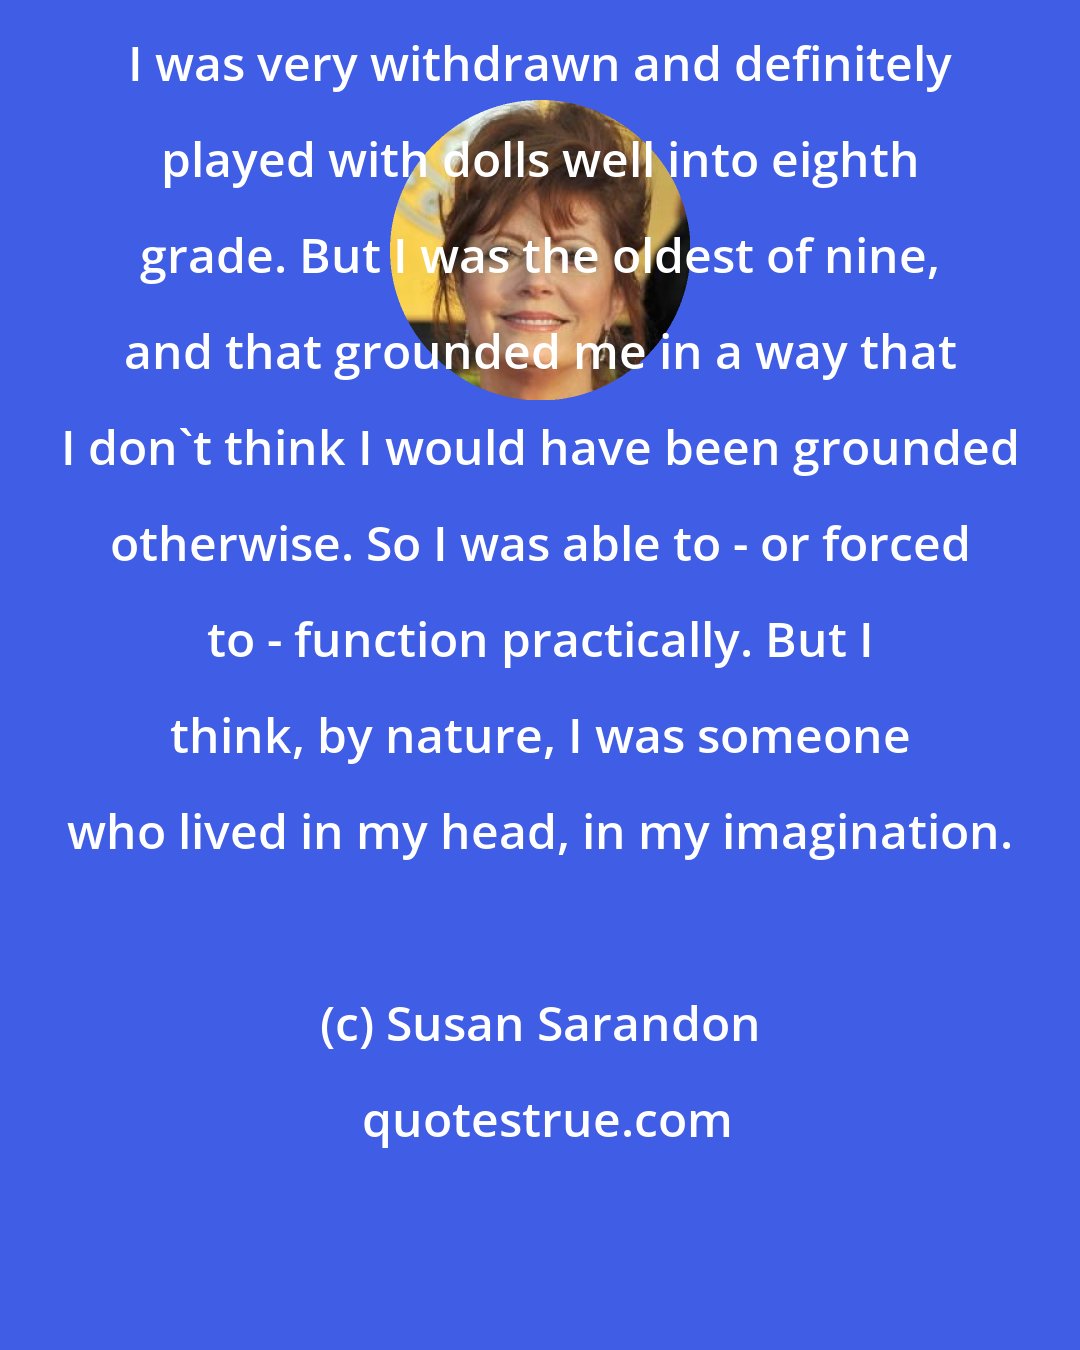 Susan Sarandon: I was very withdrawn and definitely played with dolls well into eighth grade. But I was the oldest of nine, and that grounded me in a way that I don't think I would have been grounded otherwise. So I was able to - or forced to - function practically. But I think, by nature, I was someone who lived in my head, in my imagination.